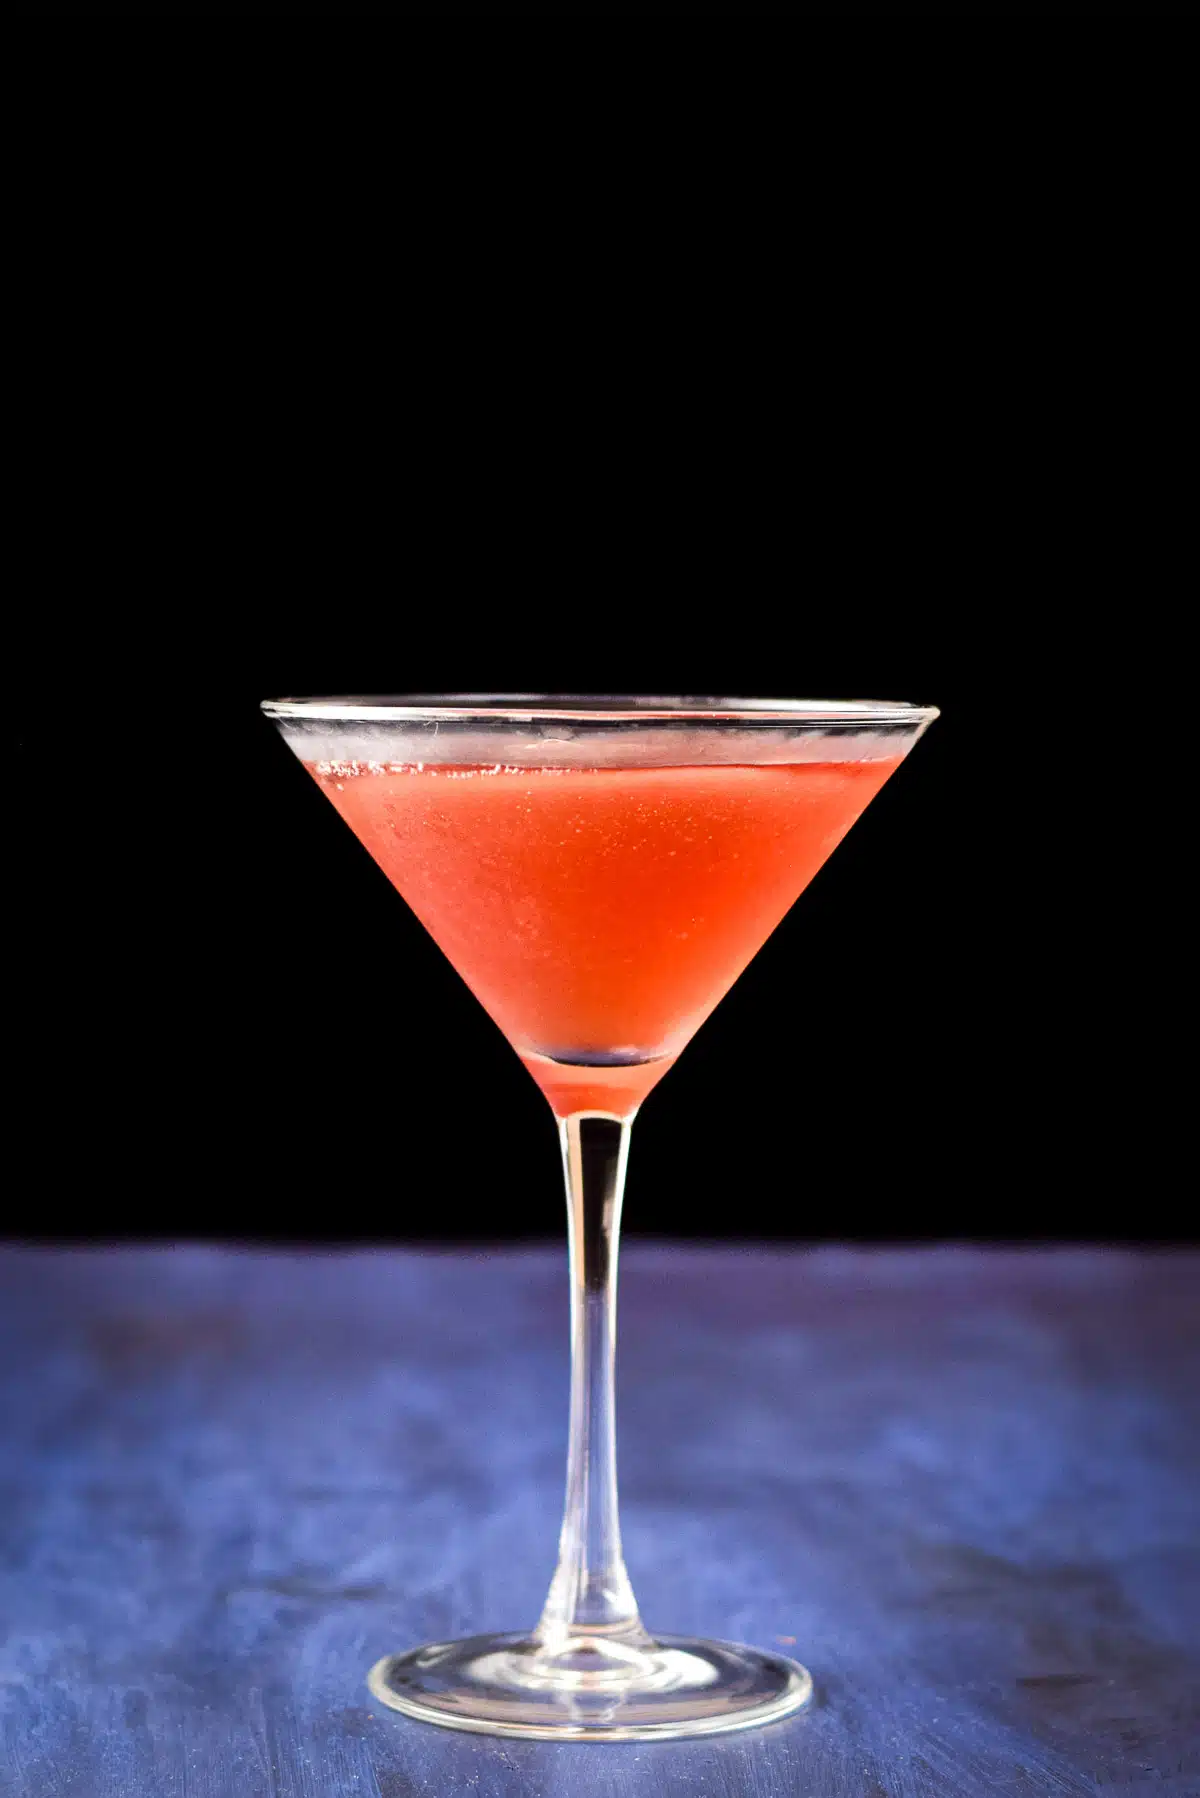 Vertical view of a martini glass filled with a red drink